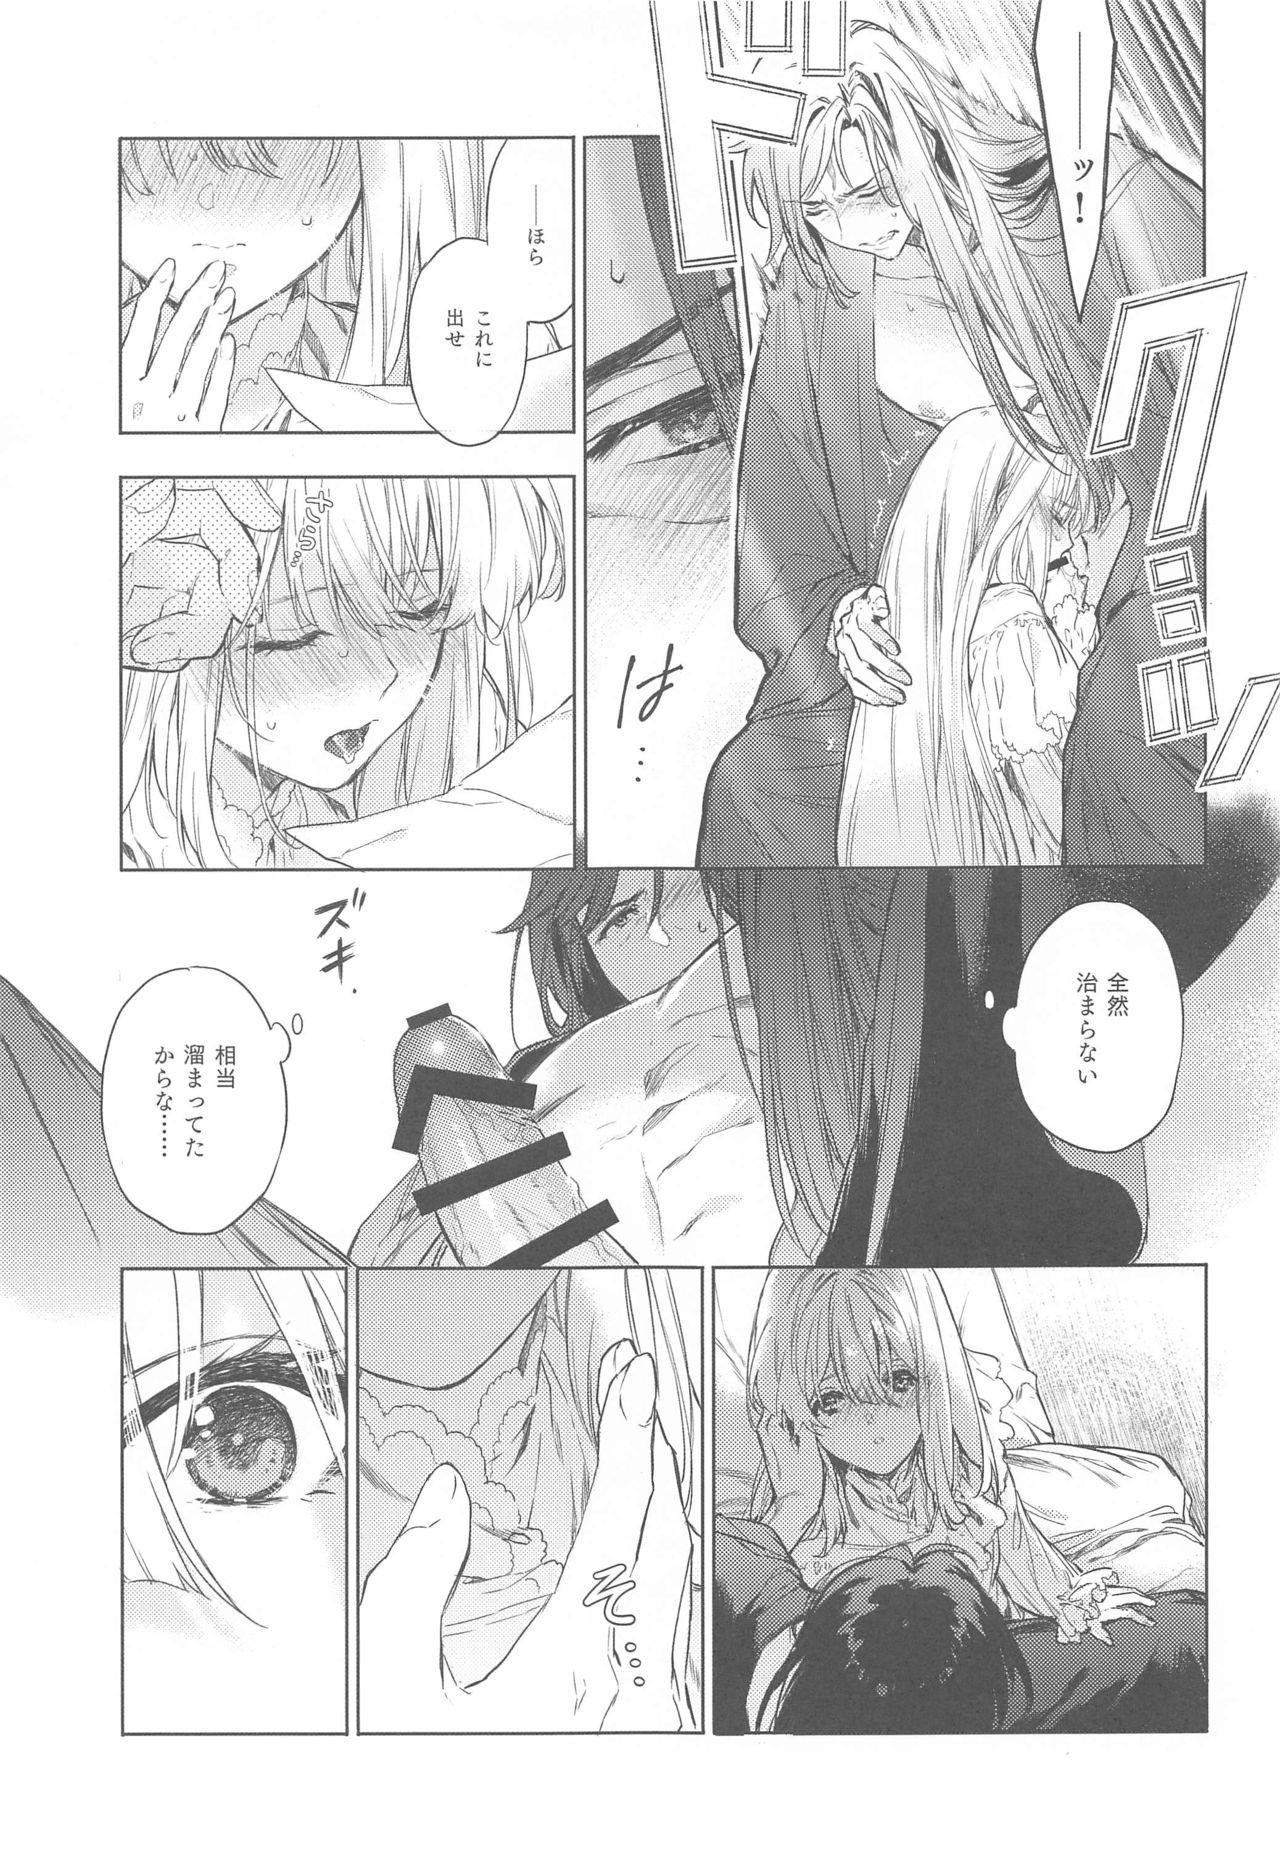 Oil Scars of love - Violet evergarden Hot Cunt - Page 8